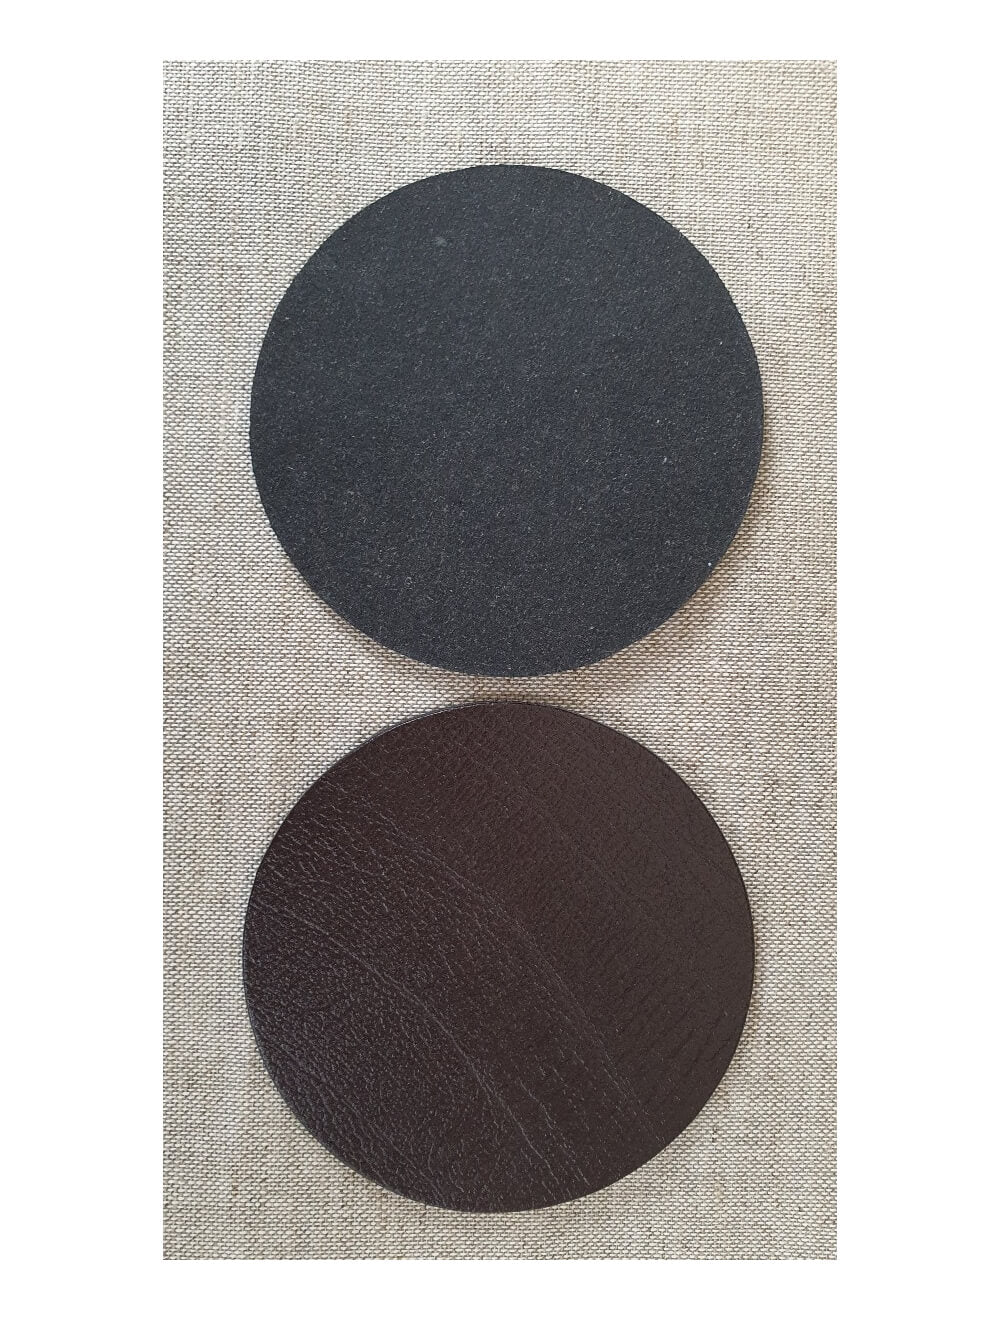 Brown Bonded Leather Coaster 10cm round (Sale Item)